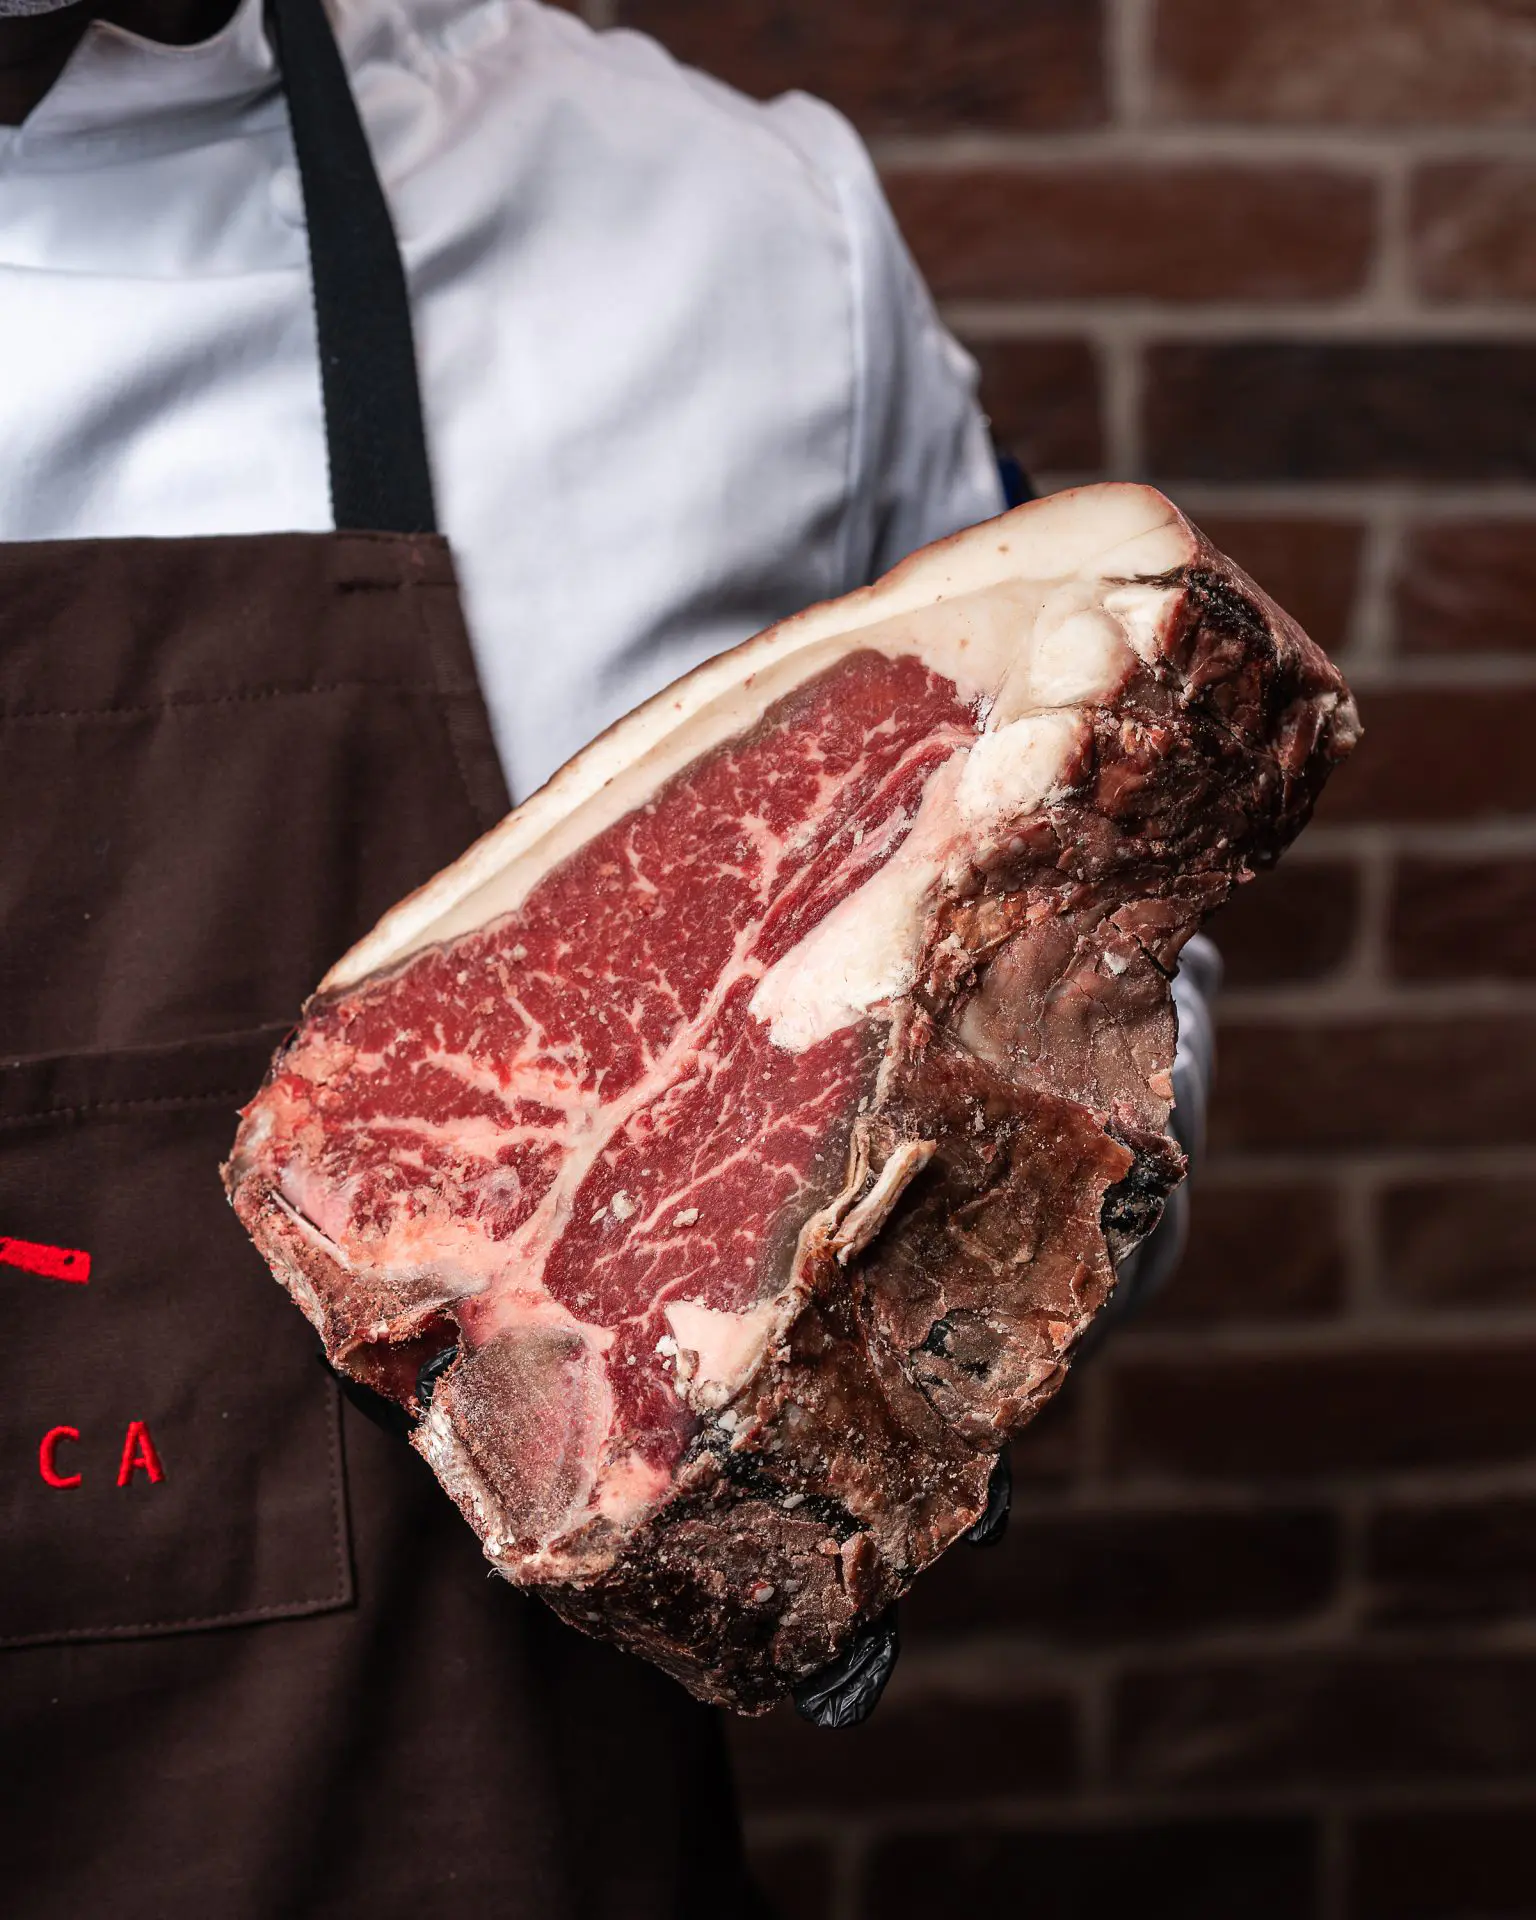 A premium cut of dry-aged beef served at Chi Spacca, Italian Steakhouse Restaurant in Riyadh - Cool Inc